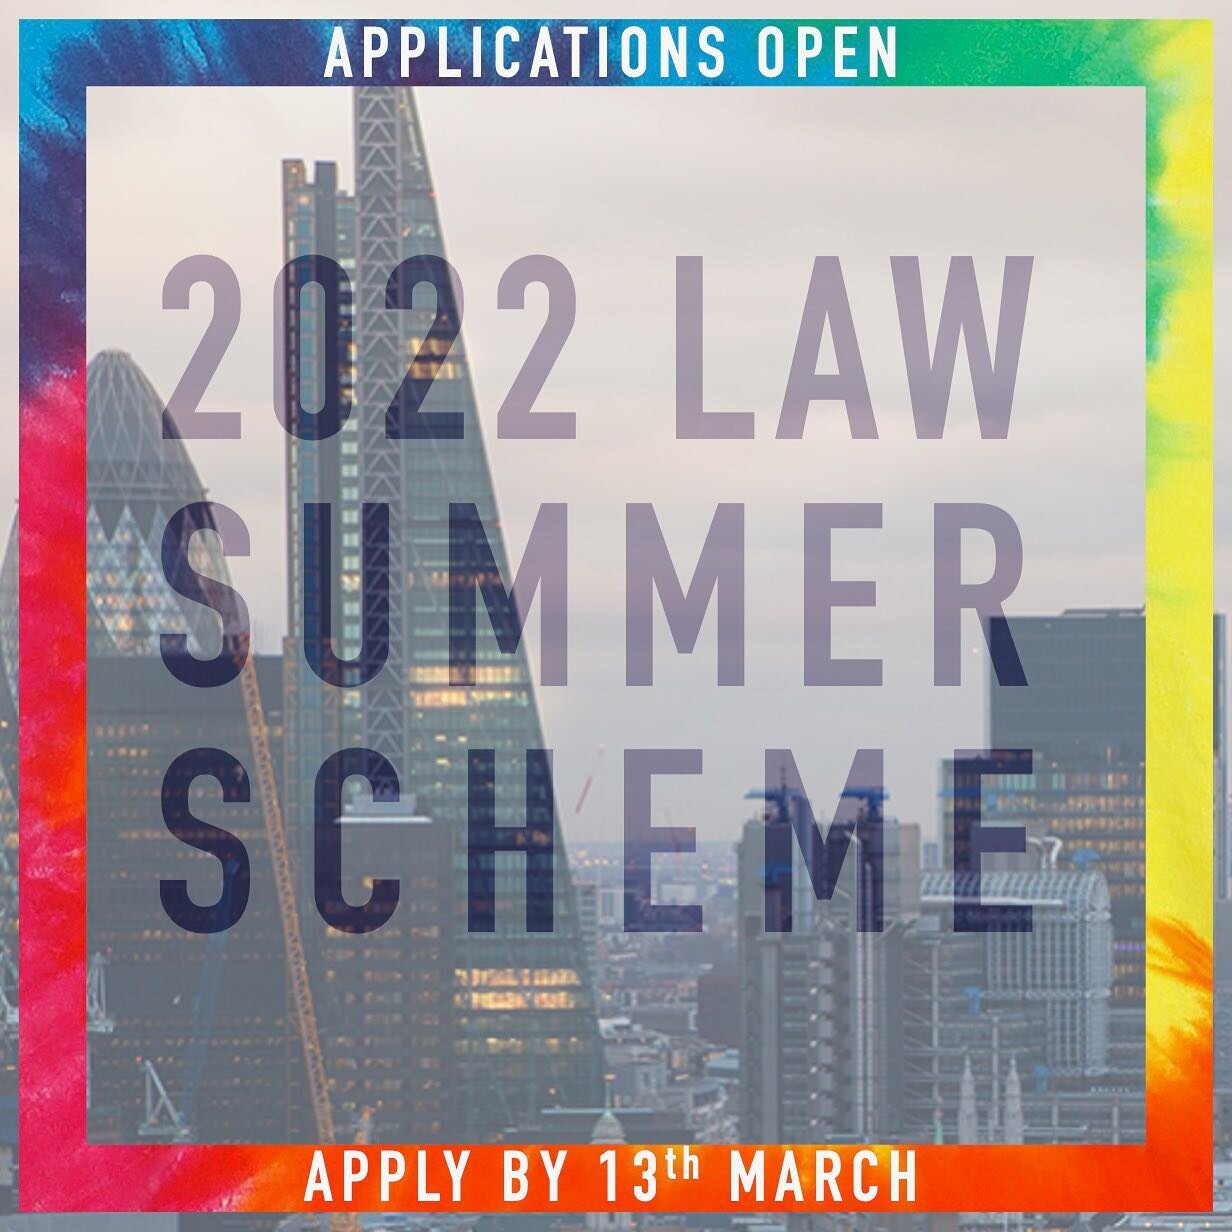 Applications for the Lord Edmund-Davies 2022 Law Summer Scheme are open. 

This is the only scheme of its kind being offered to students in Wales, giving students the opportunity to see first-hand what the legal profession is like from shadowing soli